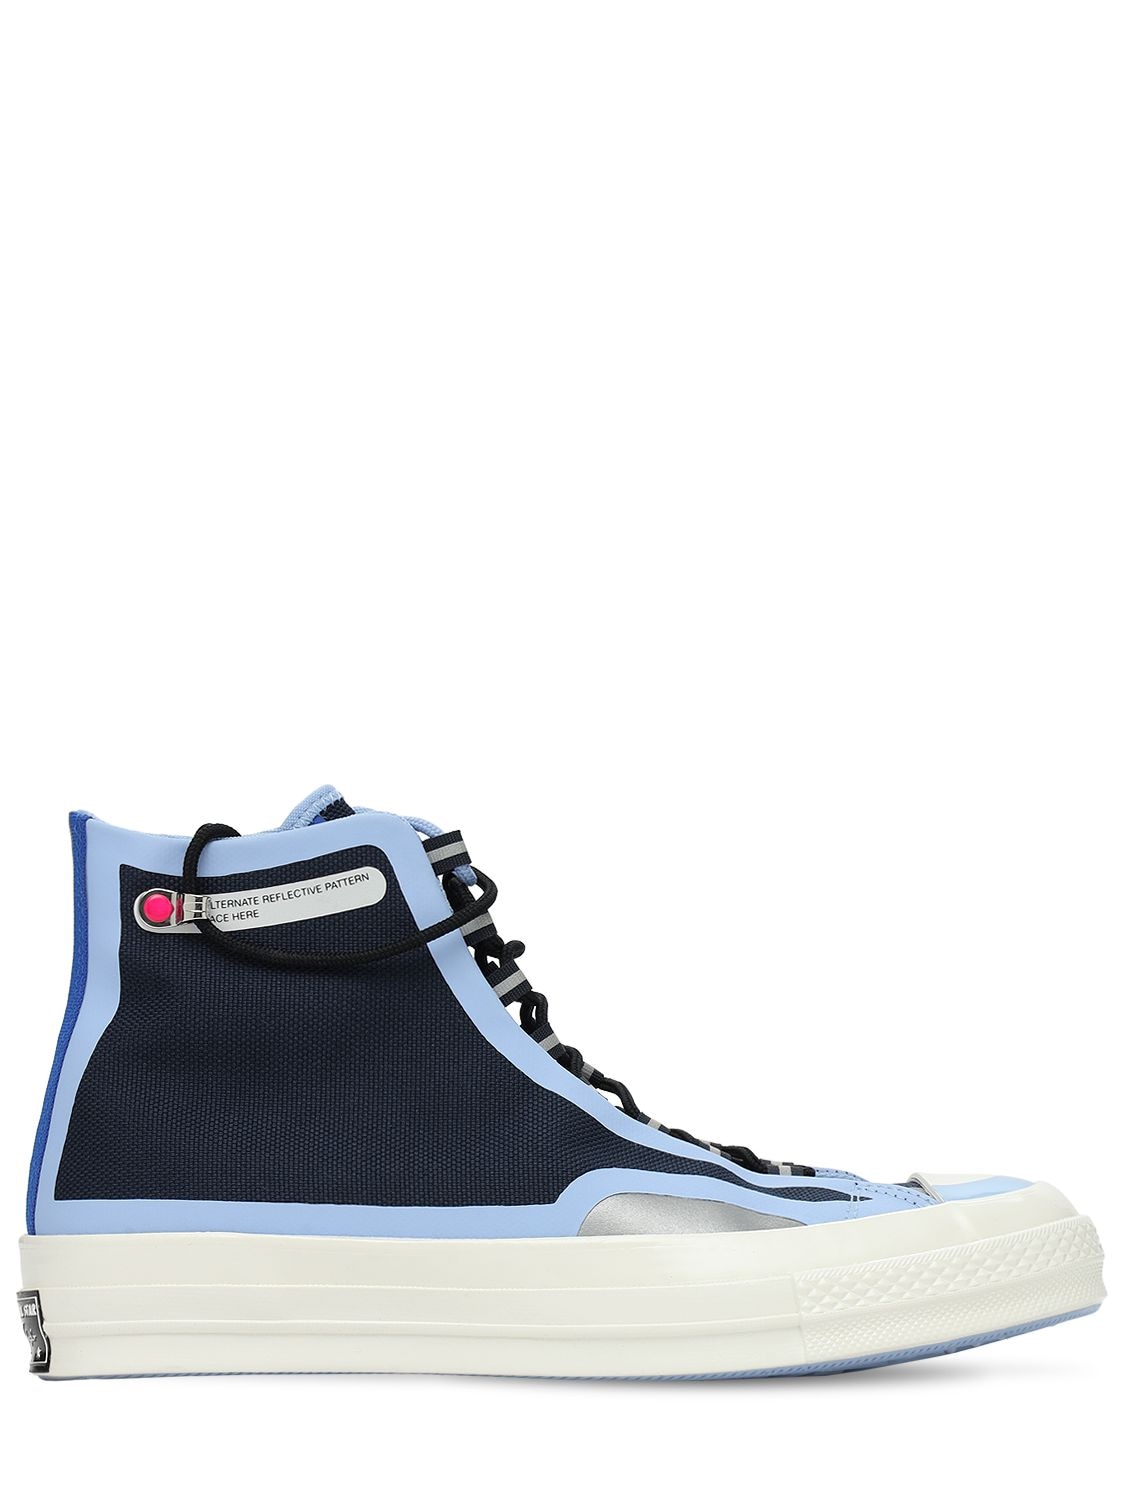 Converse Fuse Tape Ct70 Sneakers In Obsidian | ModeSens